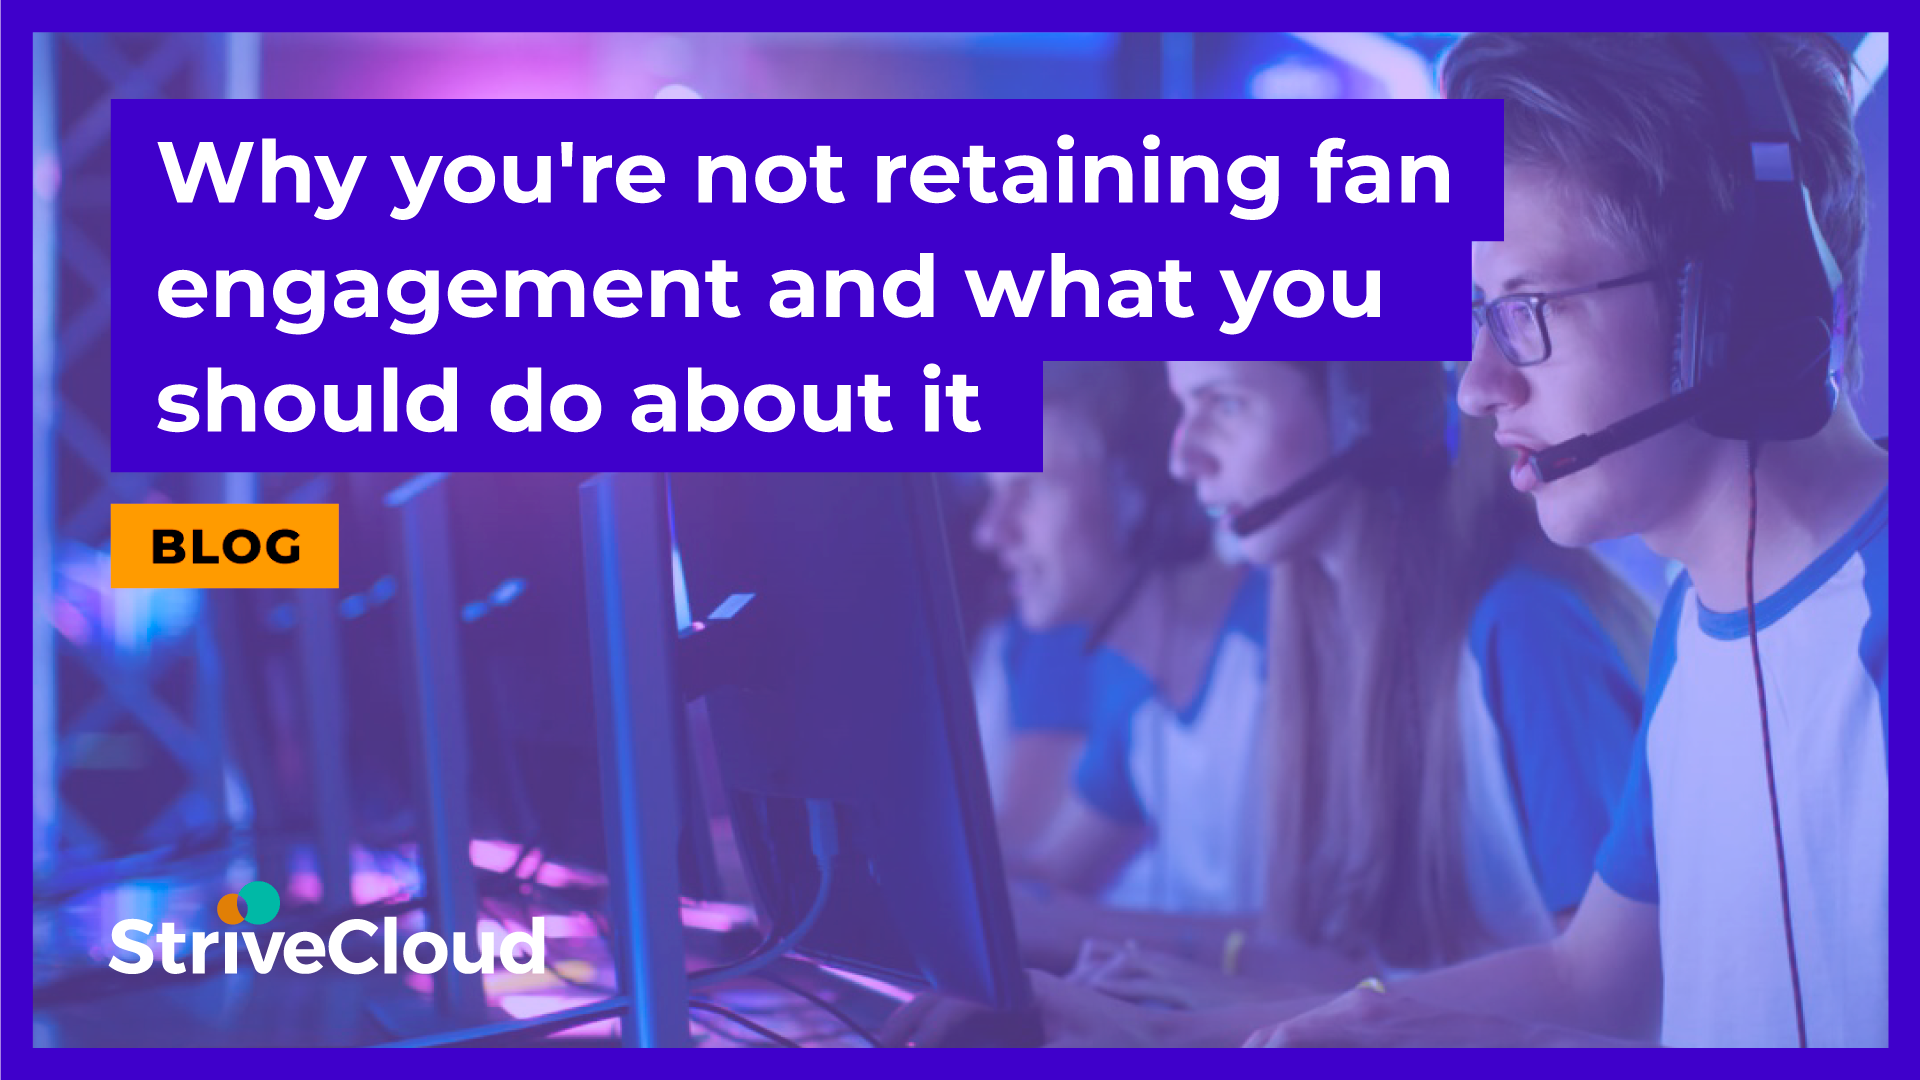 Why you're not retaining fan engagement and what you should do about it